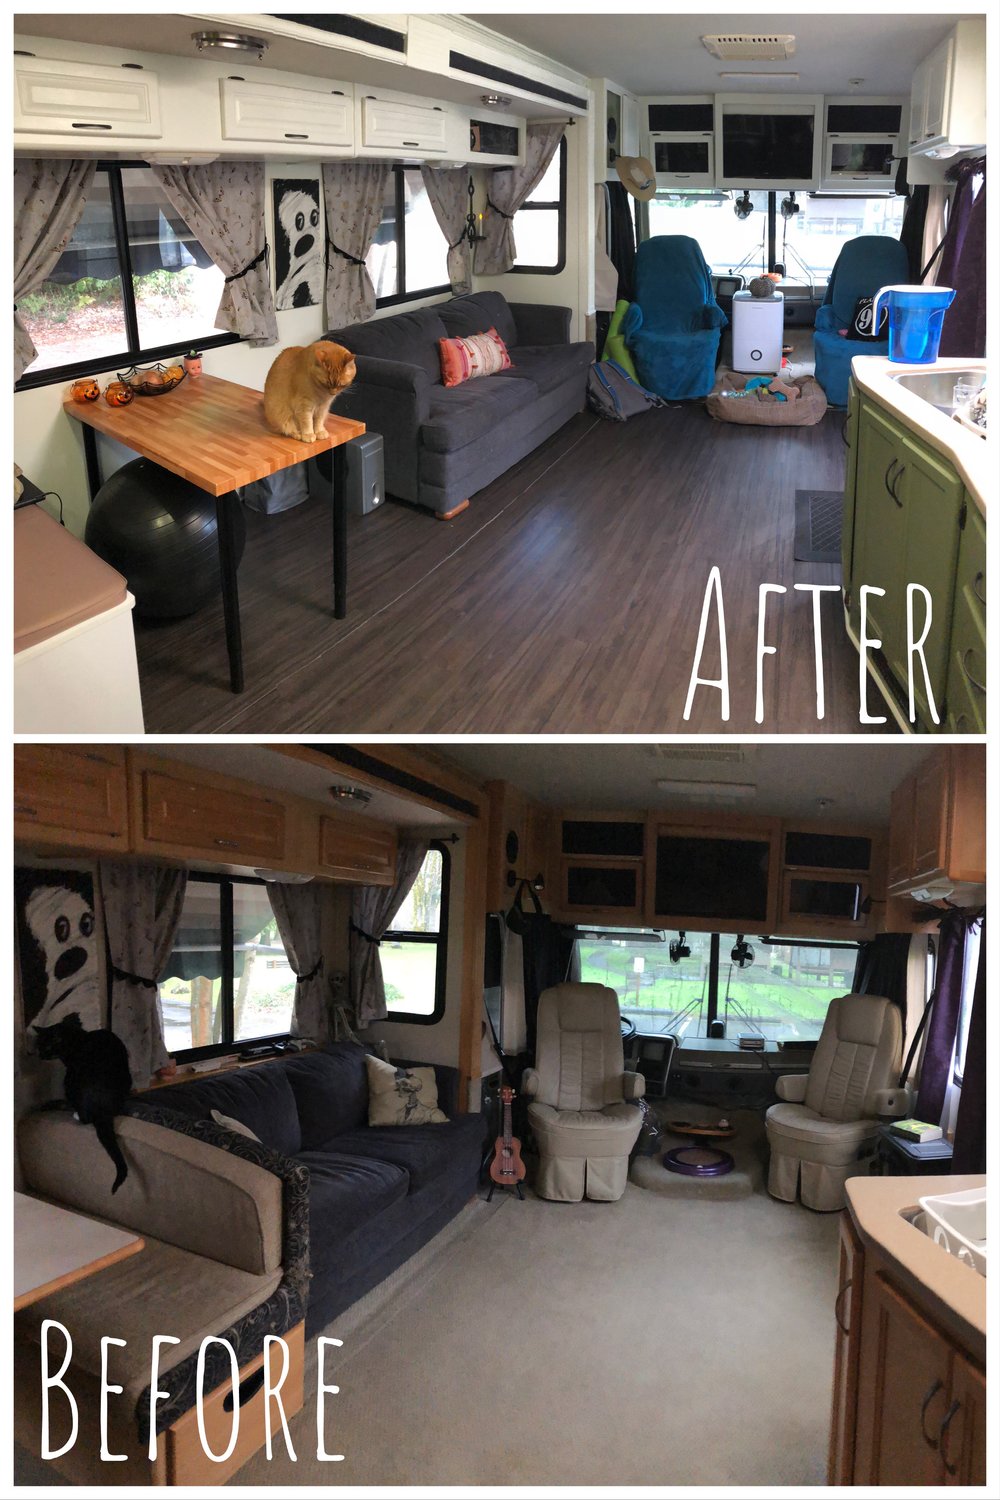 Painting An Rv Interior Otherworld, What Kind Of Paint To Use On Rv Cabinets